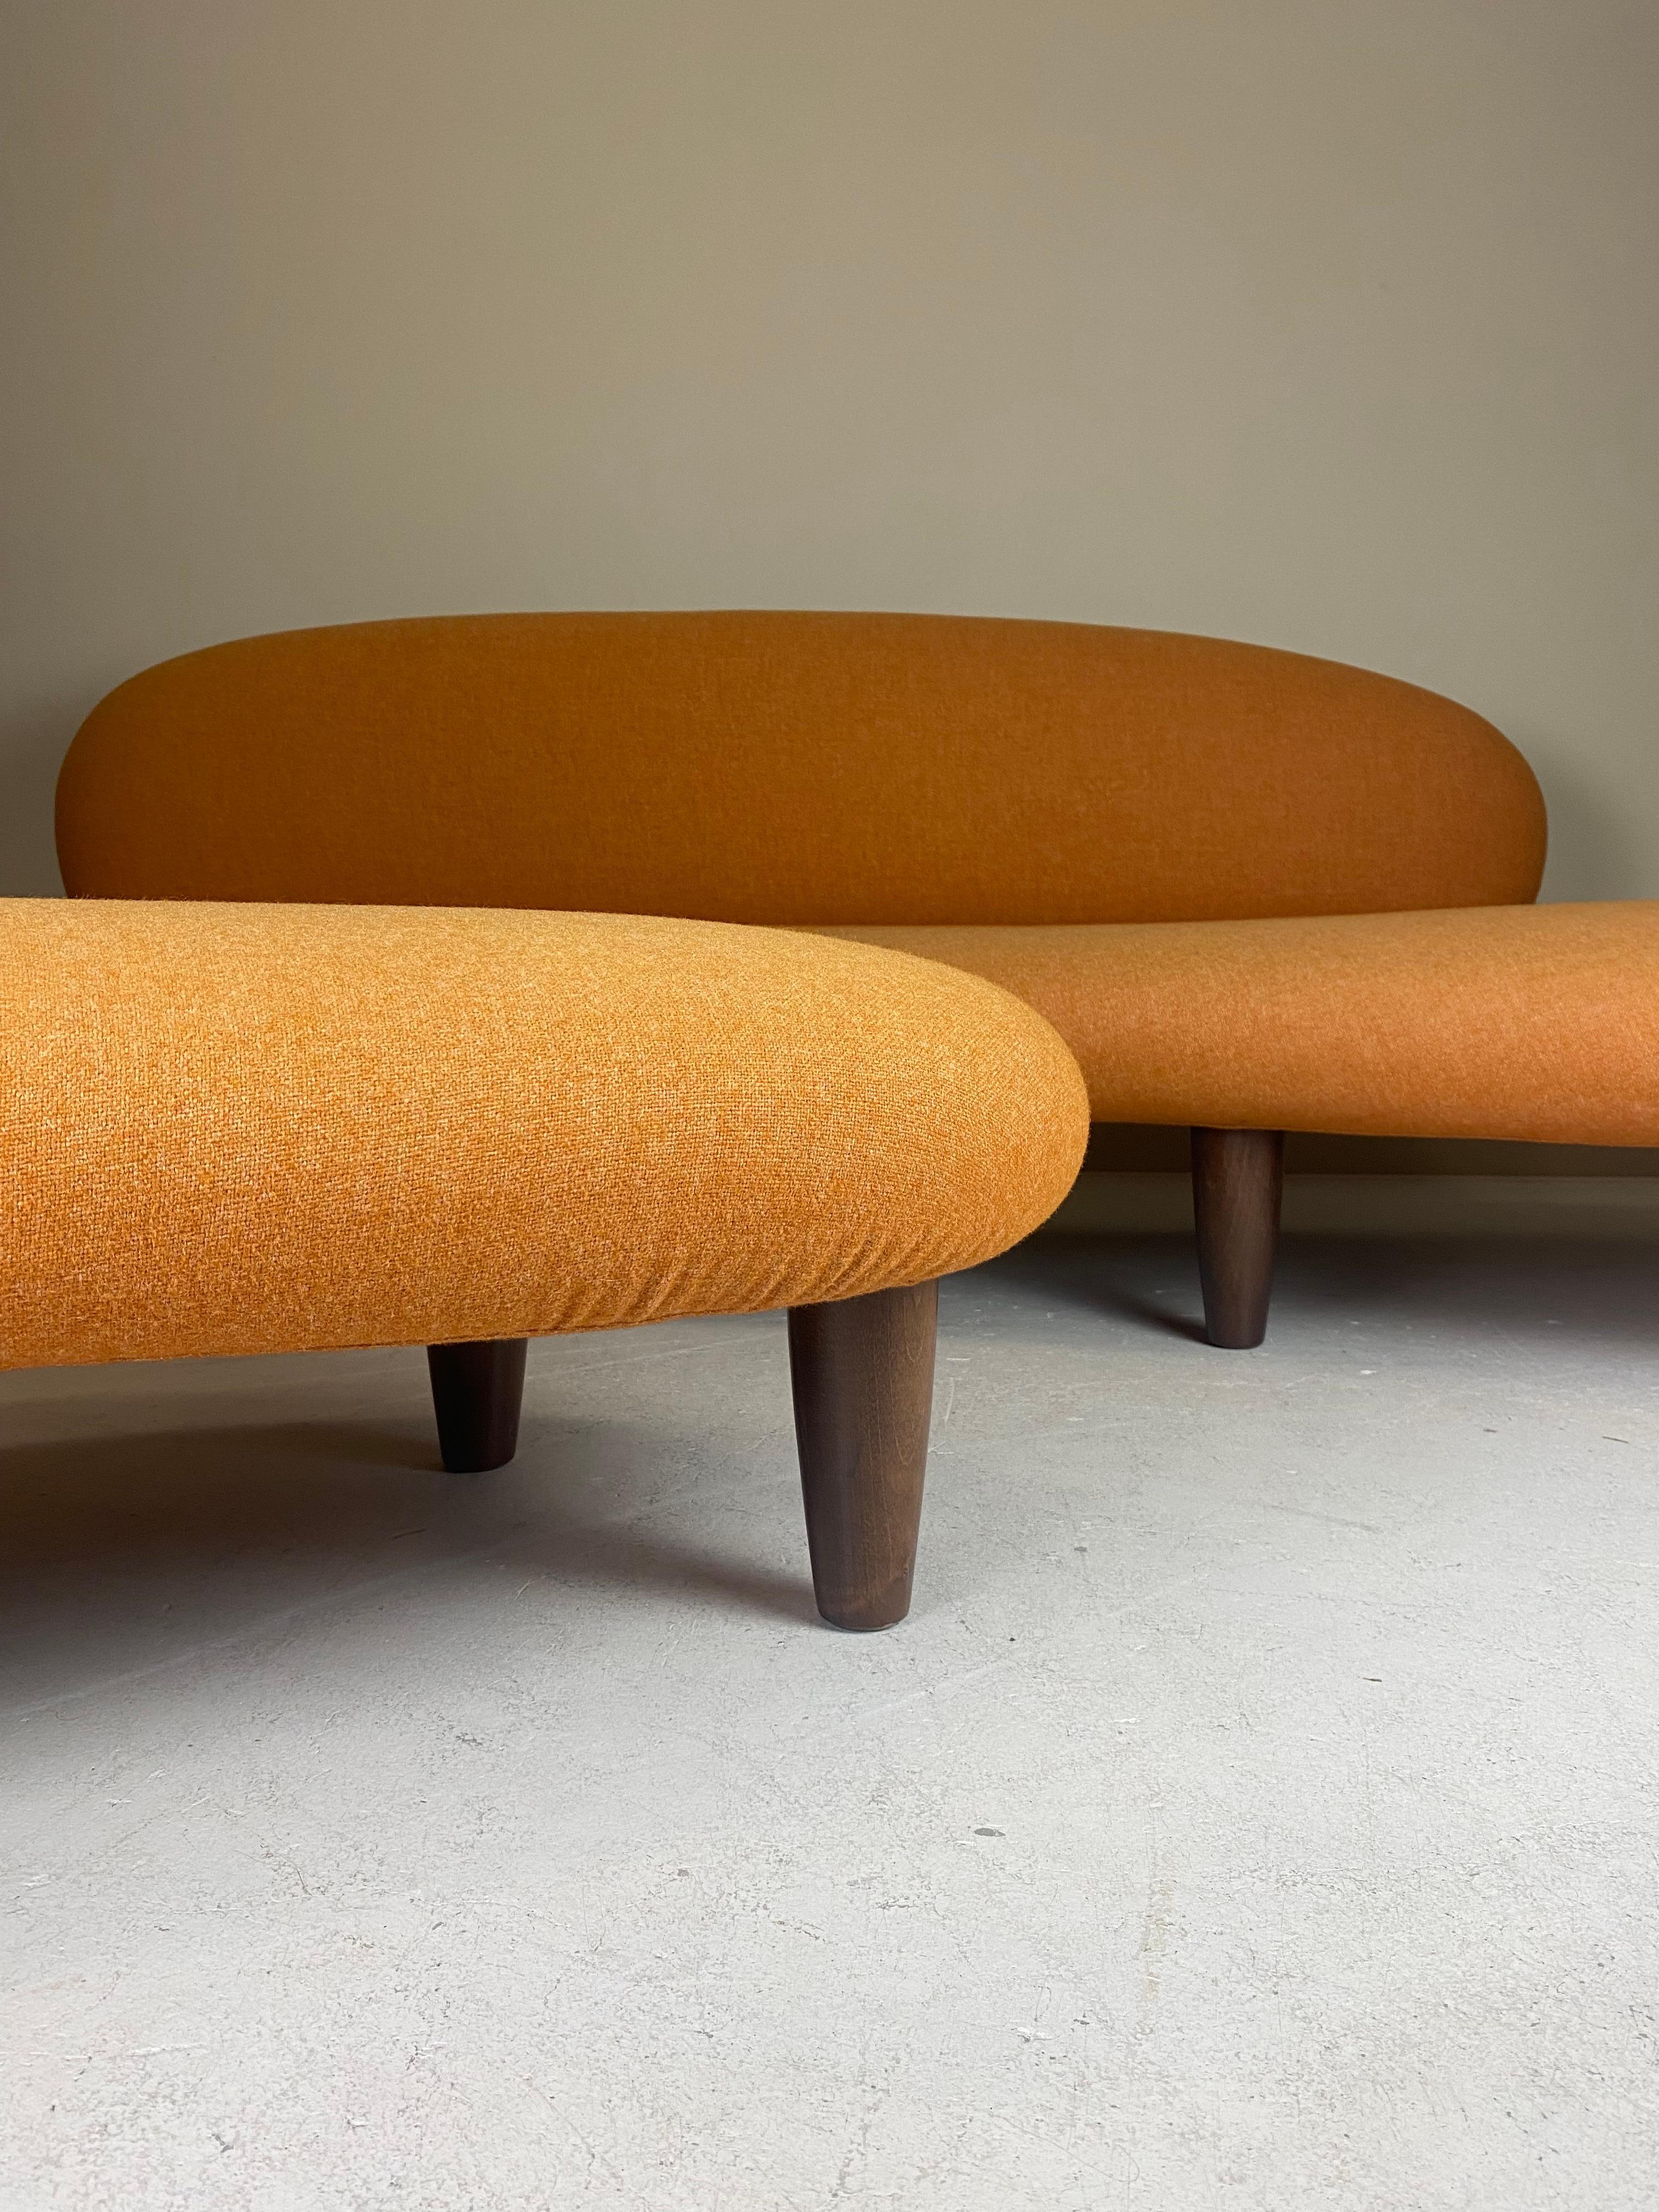 Designed in 1946 and completely different from other designs of the same period, the Freeform Sofa embodies the poetic quality in Isamu Noguchi’s designs. Brochures and magazines talk about the sculptural quality of Sofa and Ottoman, which seems to